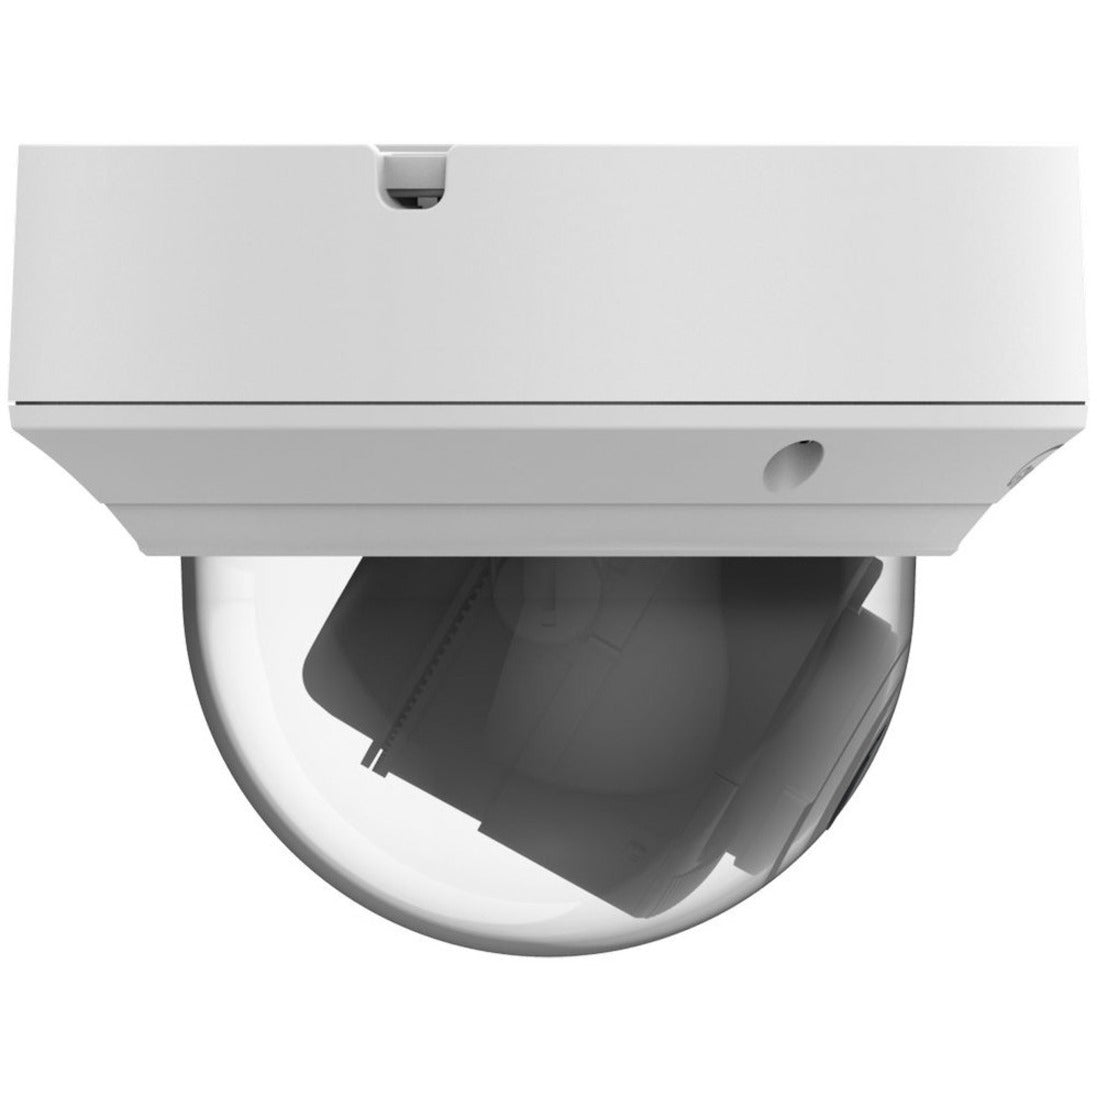 Gyration CYBERVIEW 411D-TAA 4 MP Outdoor Varifocal Dome Camera, Motion Detection, Wide Dynamic Range, Weather Resistant